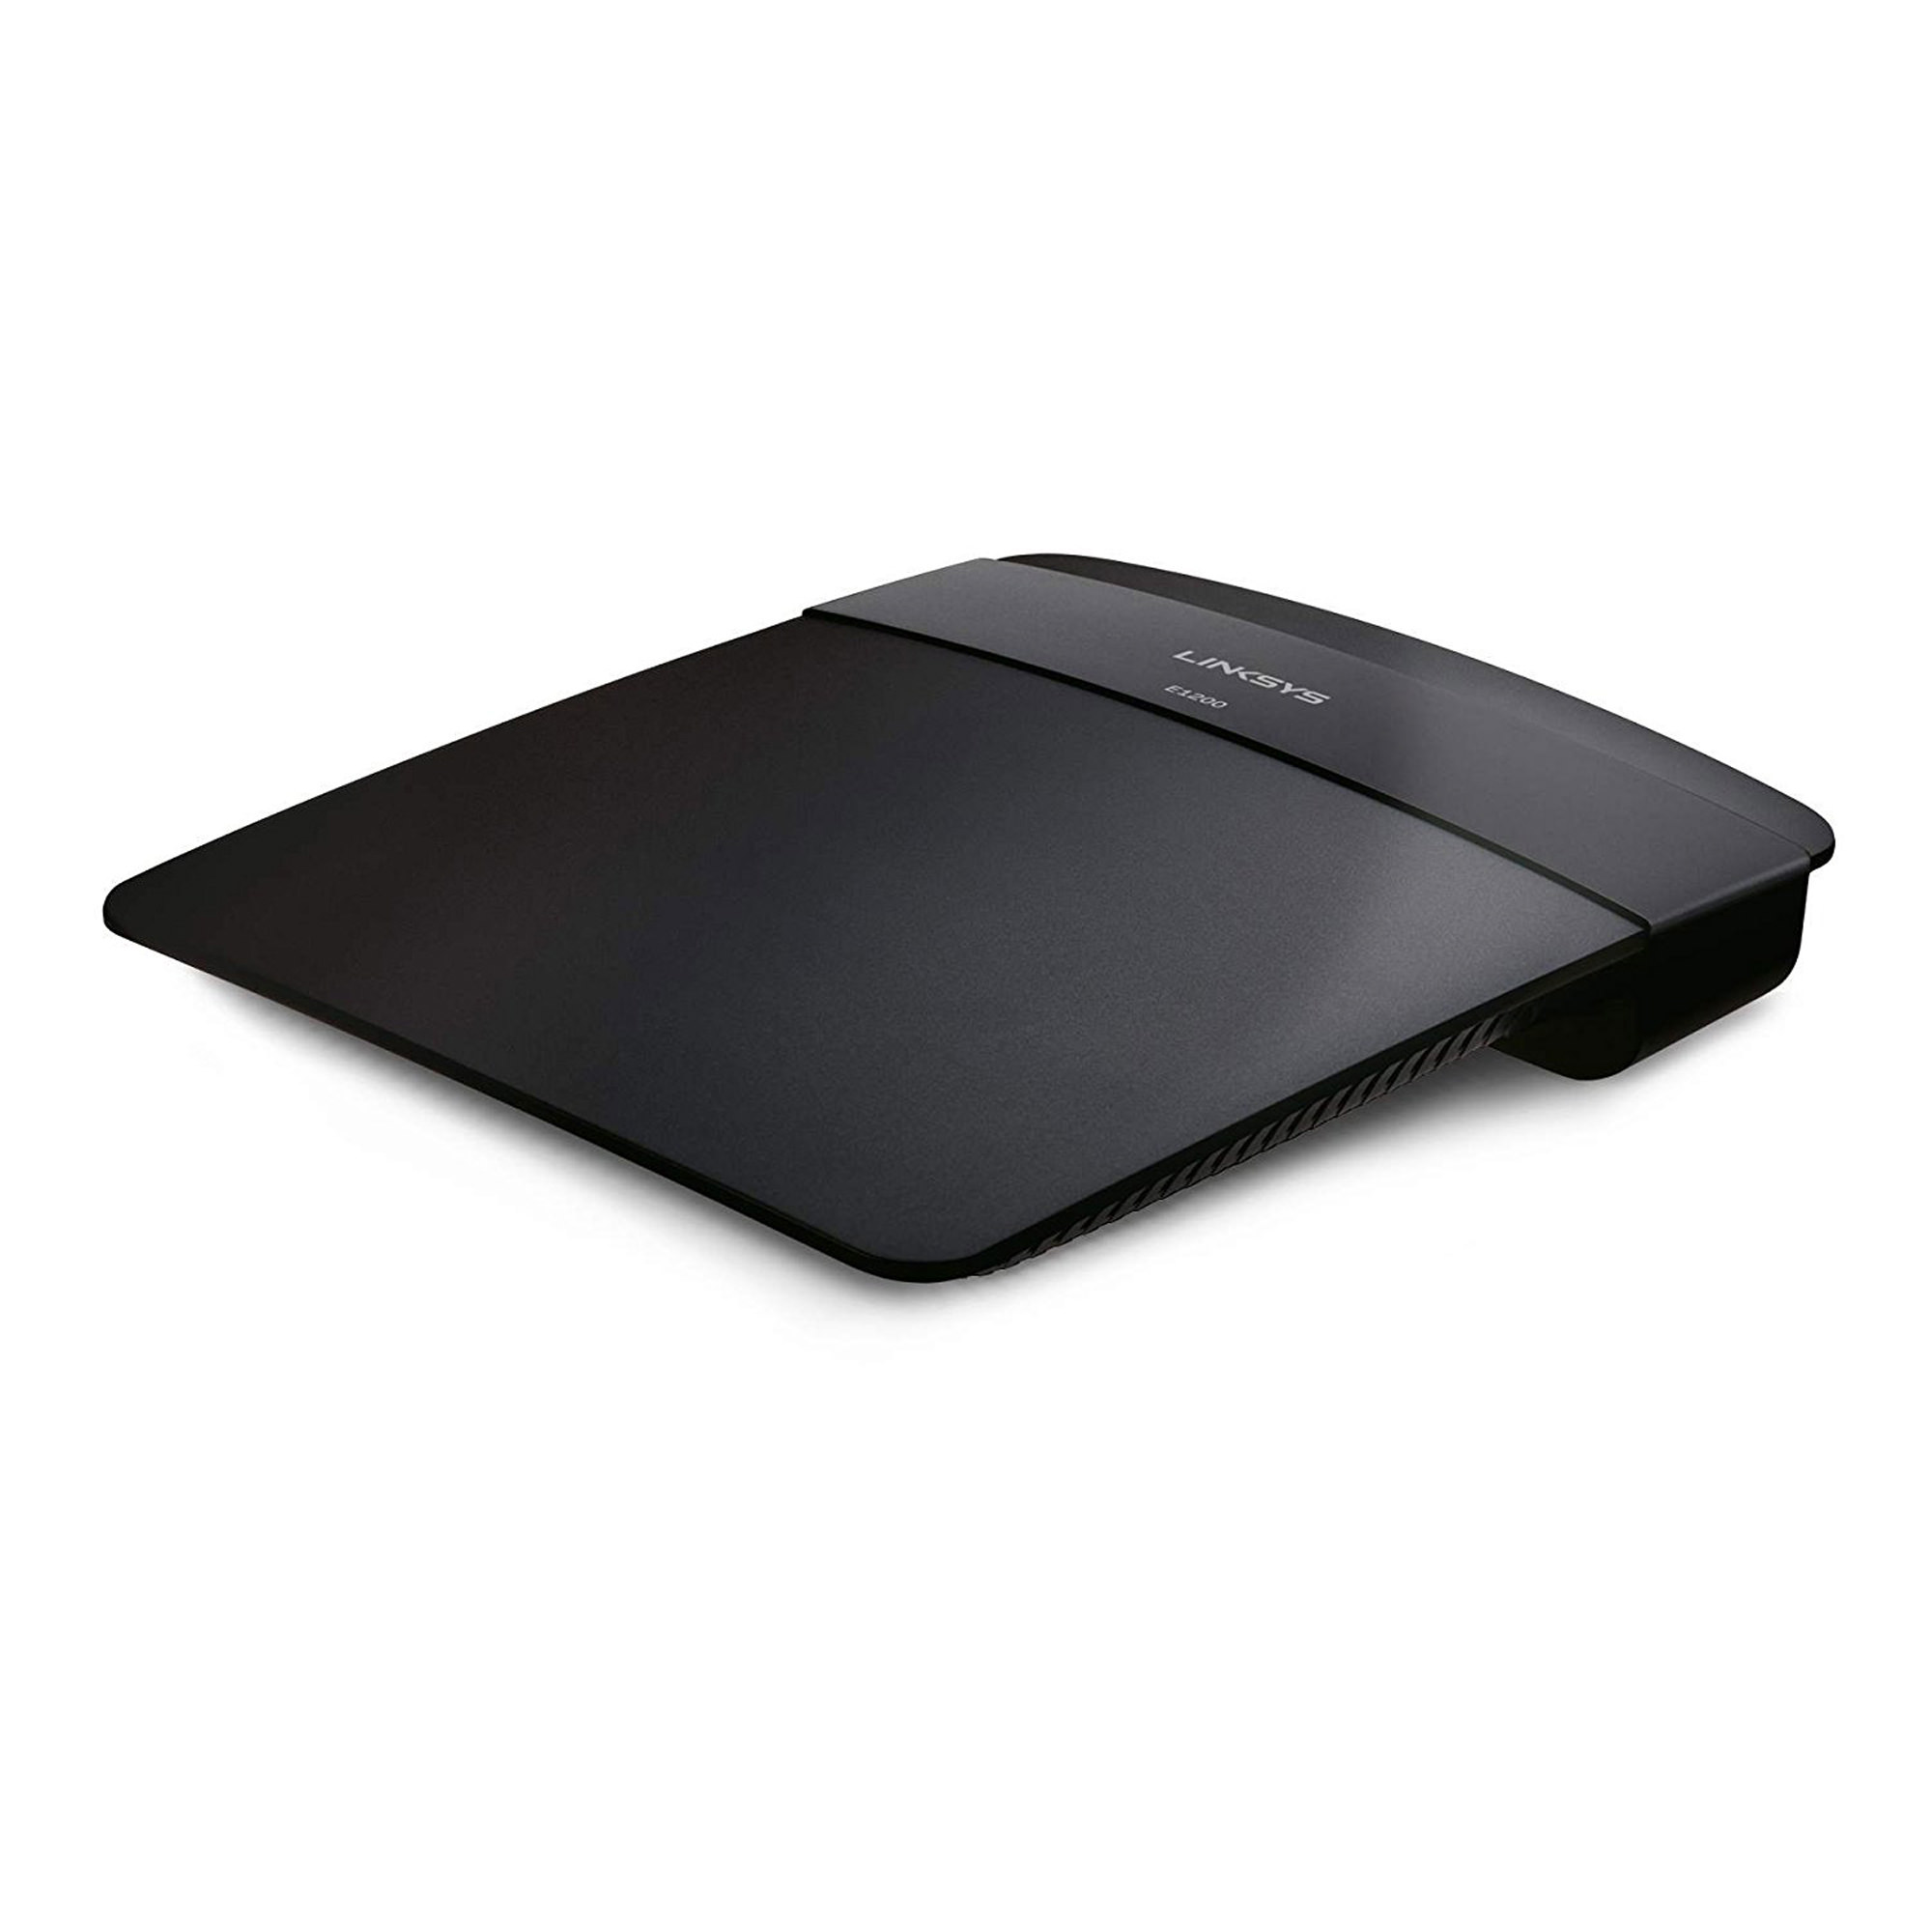 Linksys N300 Dual Band Wireless WiFi Router, Black (E1200) - image 3 of 3